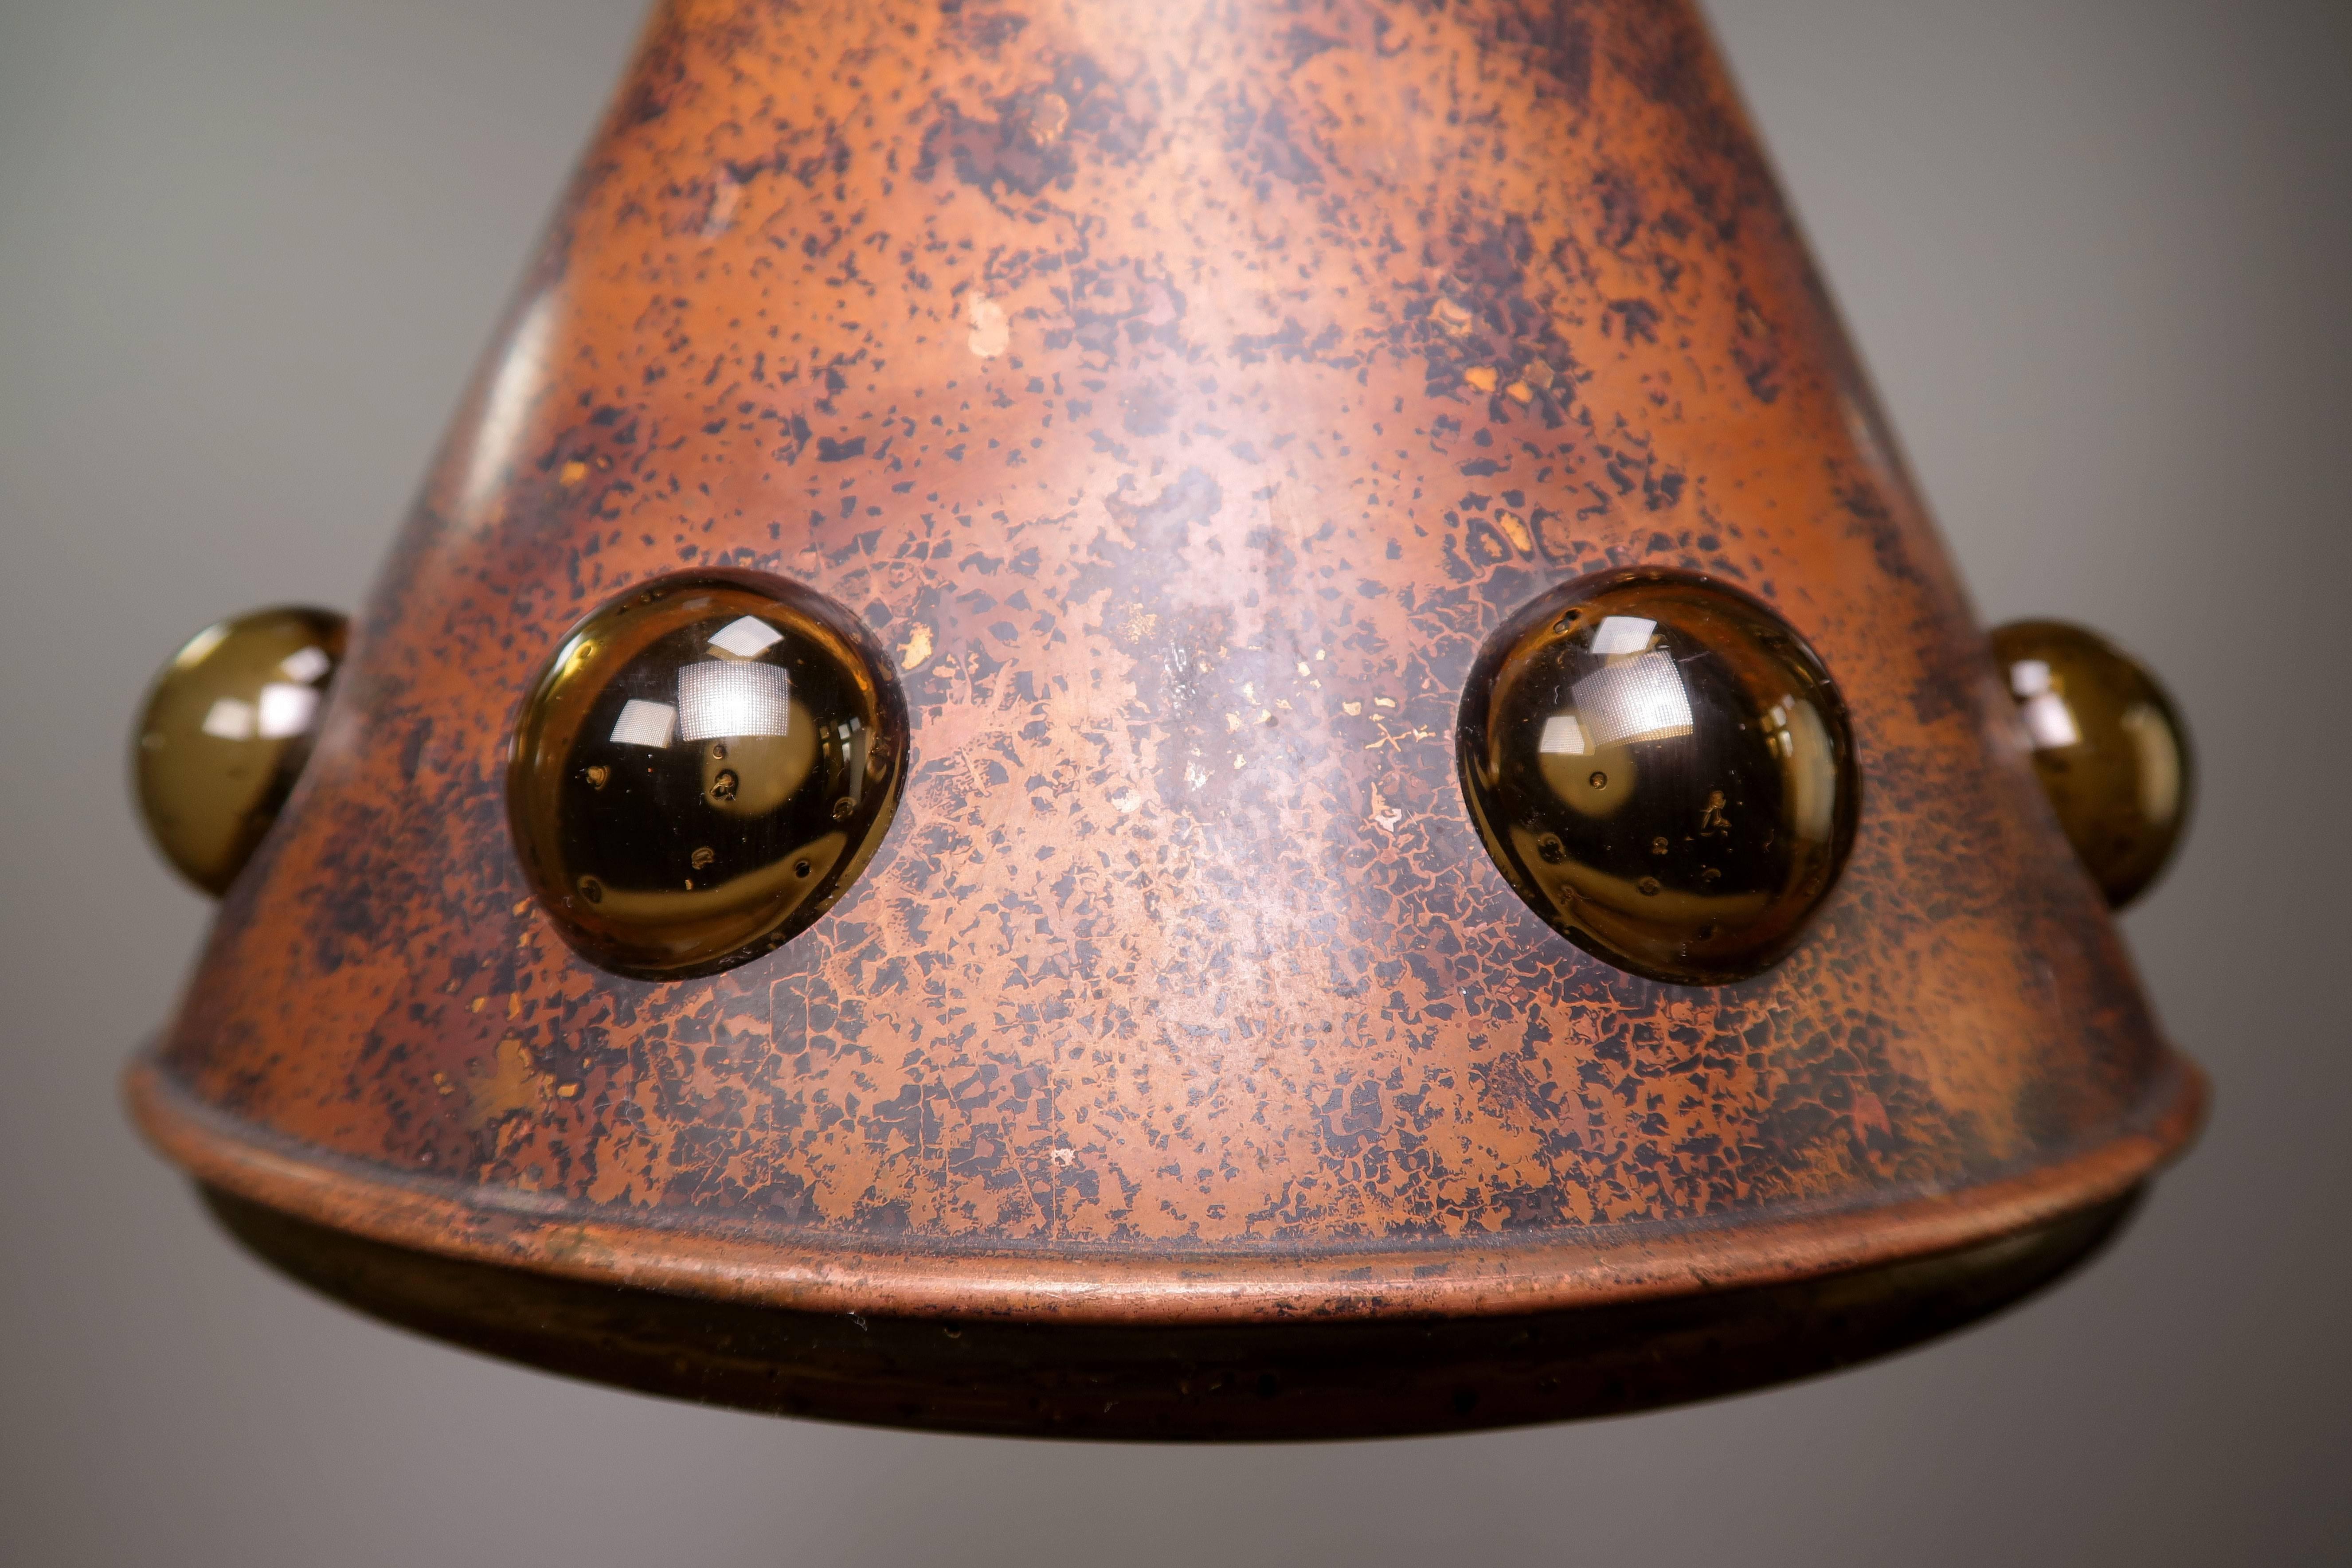 Rustic midcentury modern brutalist 1960s Finnish/Dutch ceiling copper pendant. Thick textured amber glass cone covered with blackened copper that gives way to nine 